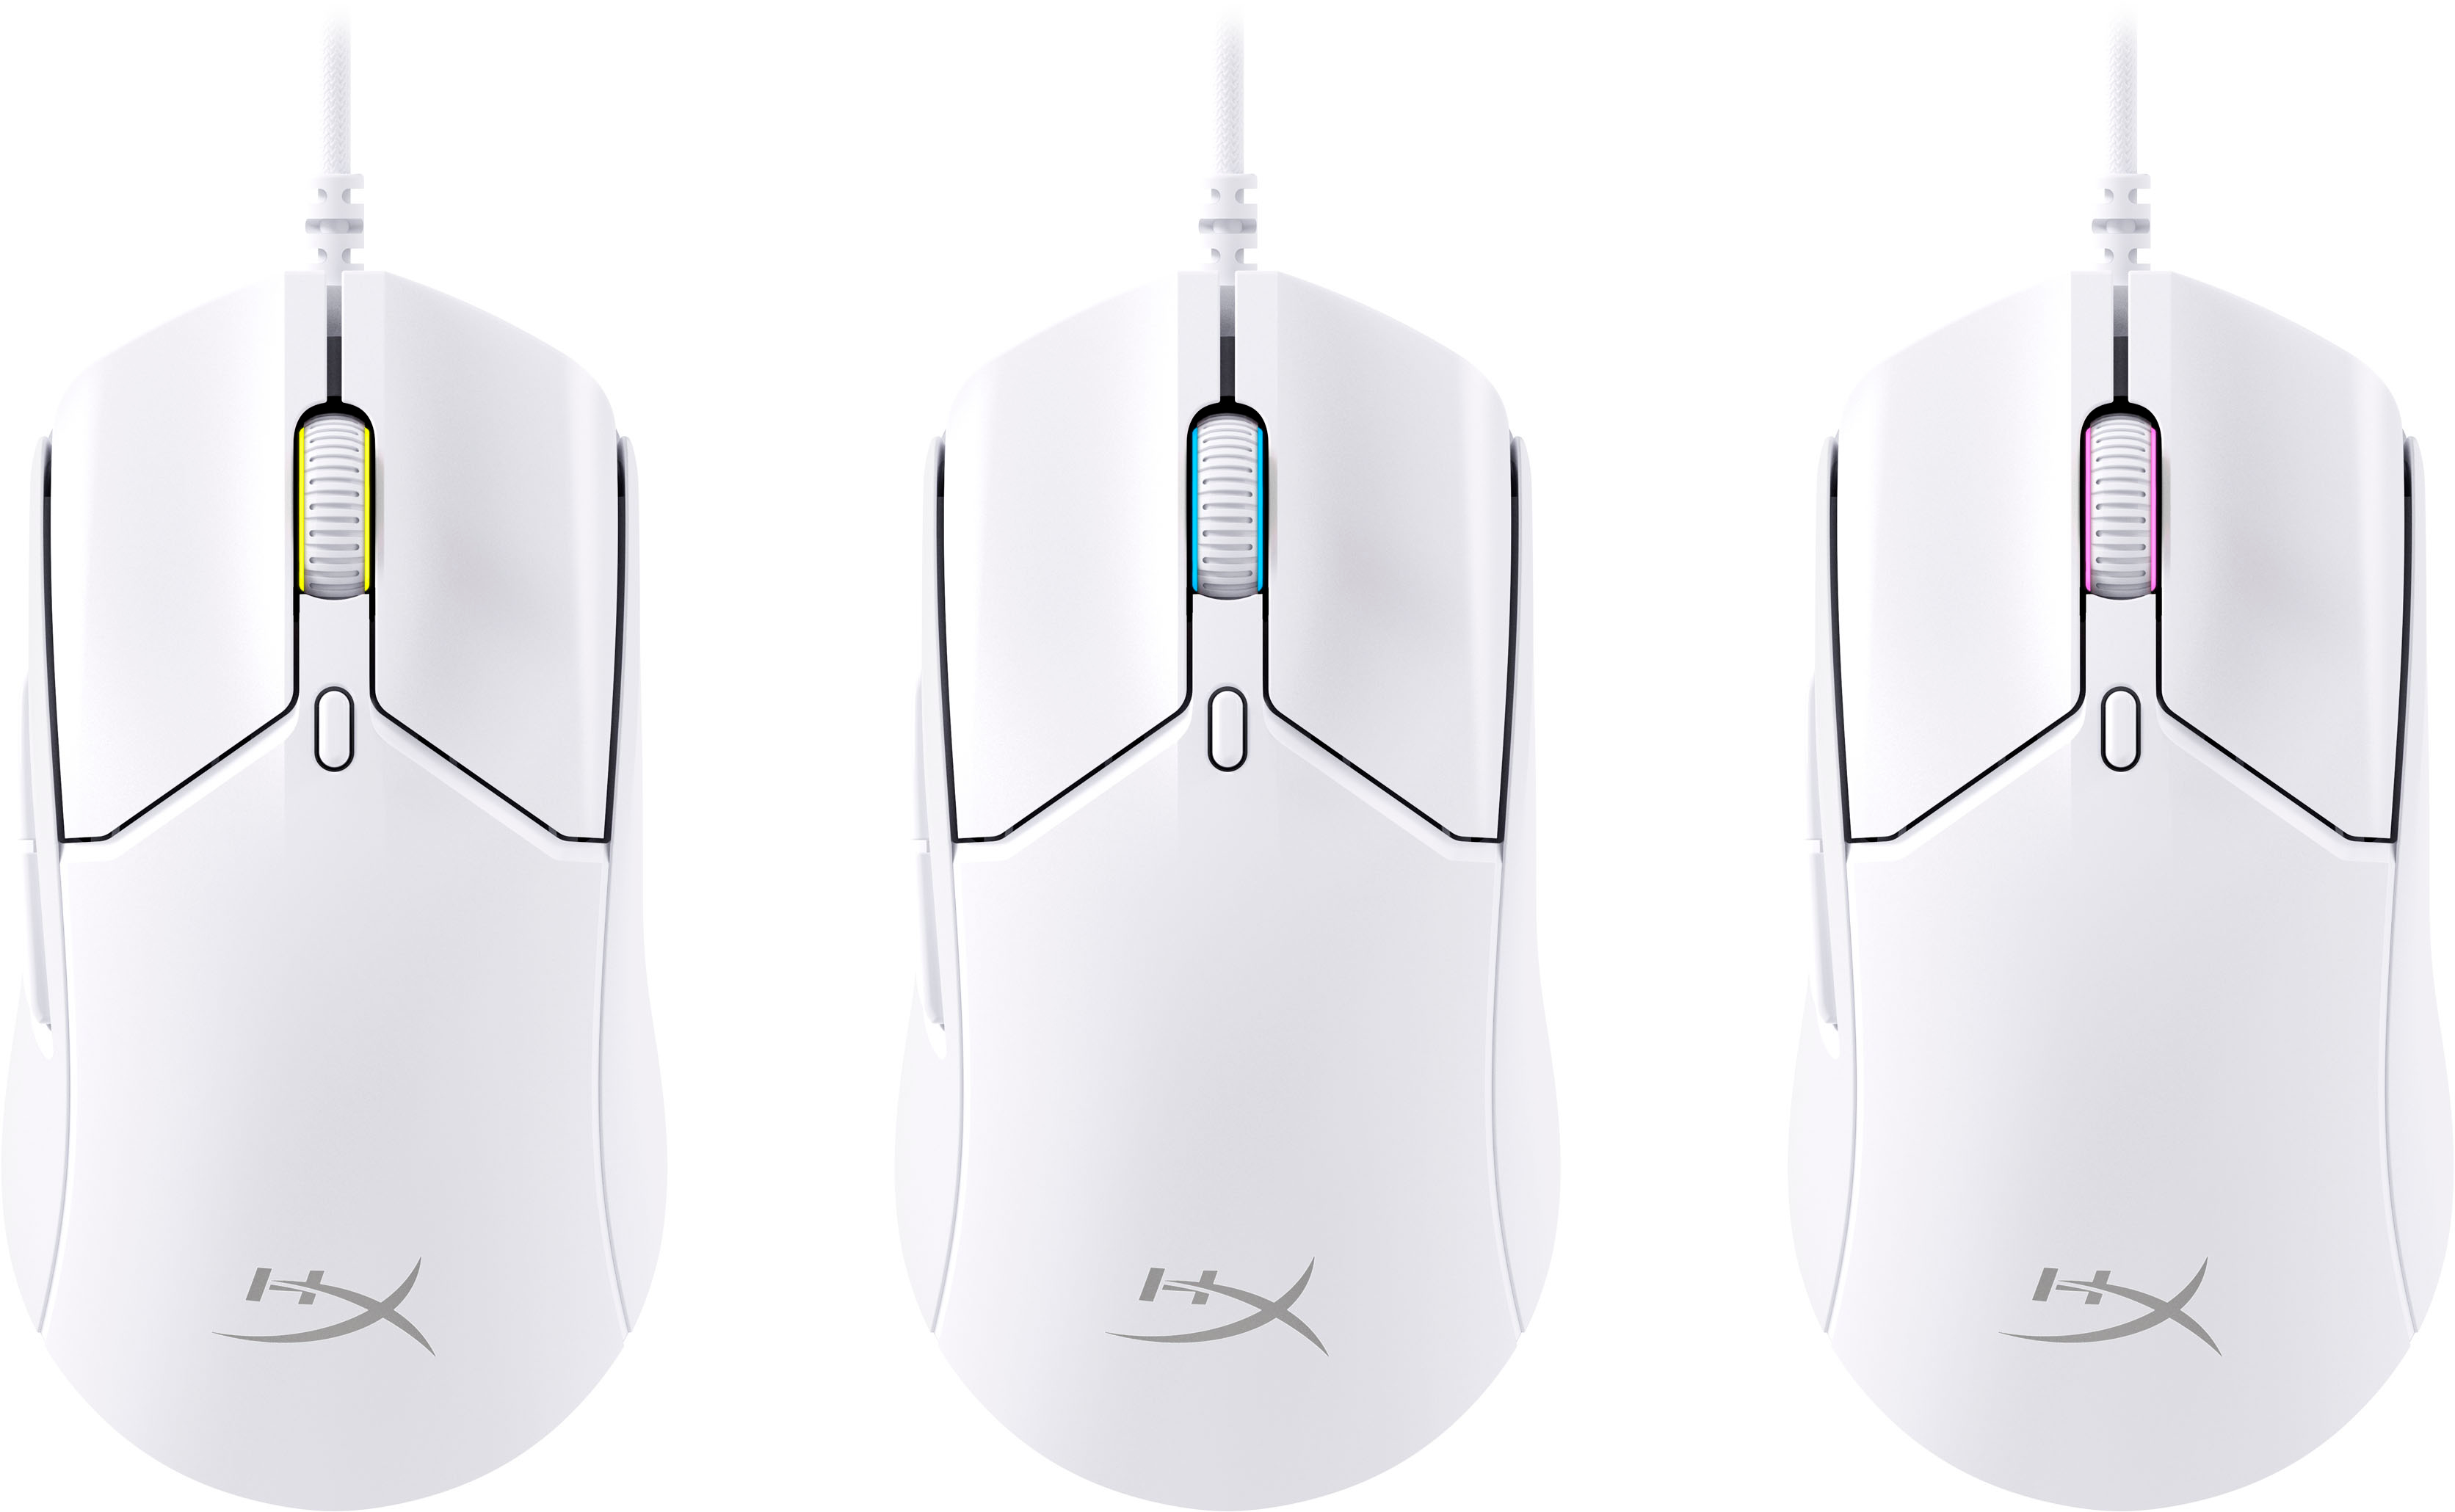 HyperX Pulsefire Haste 2 RGB Mouse Lighting Buy 6N0A8AA with Best Gaming White Optical Lightweight - Wired